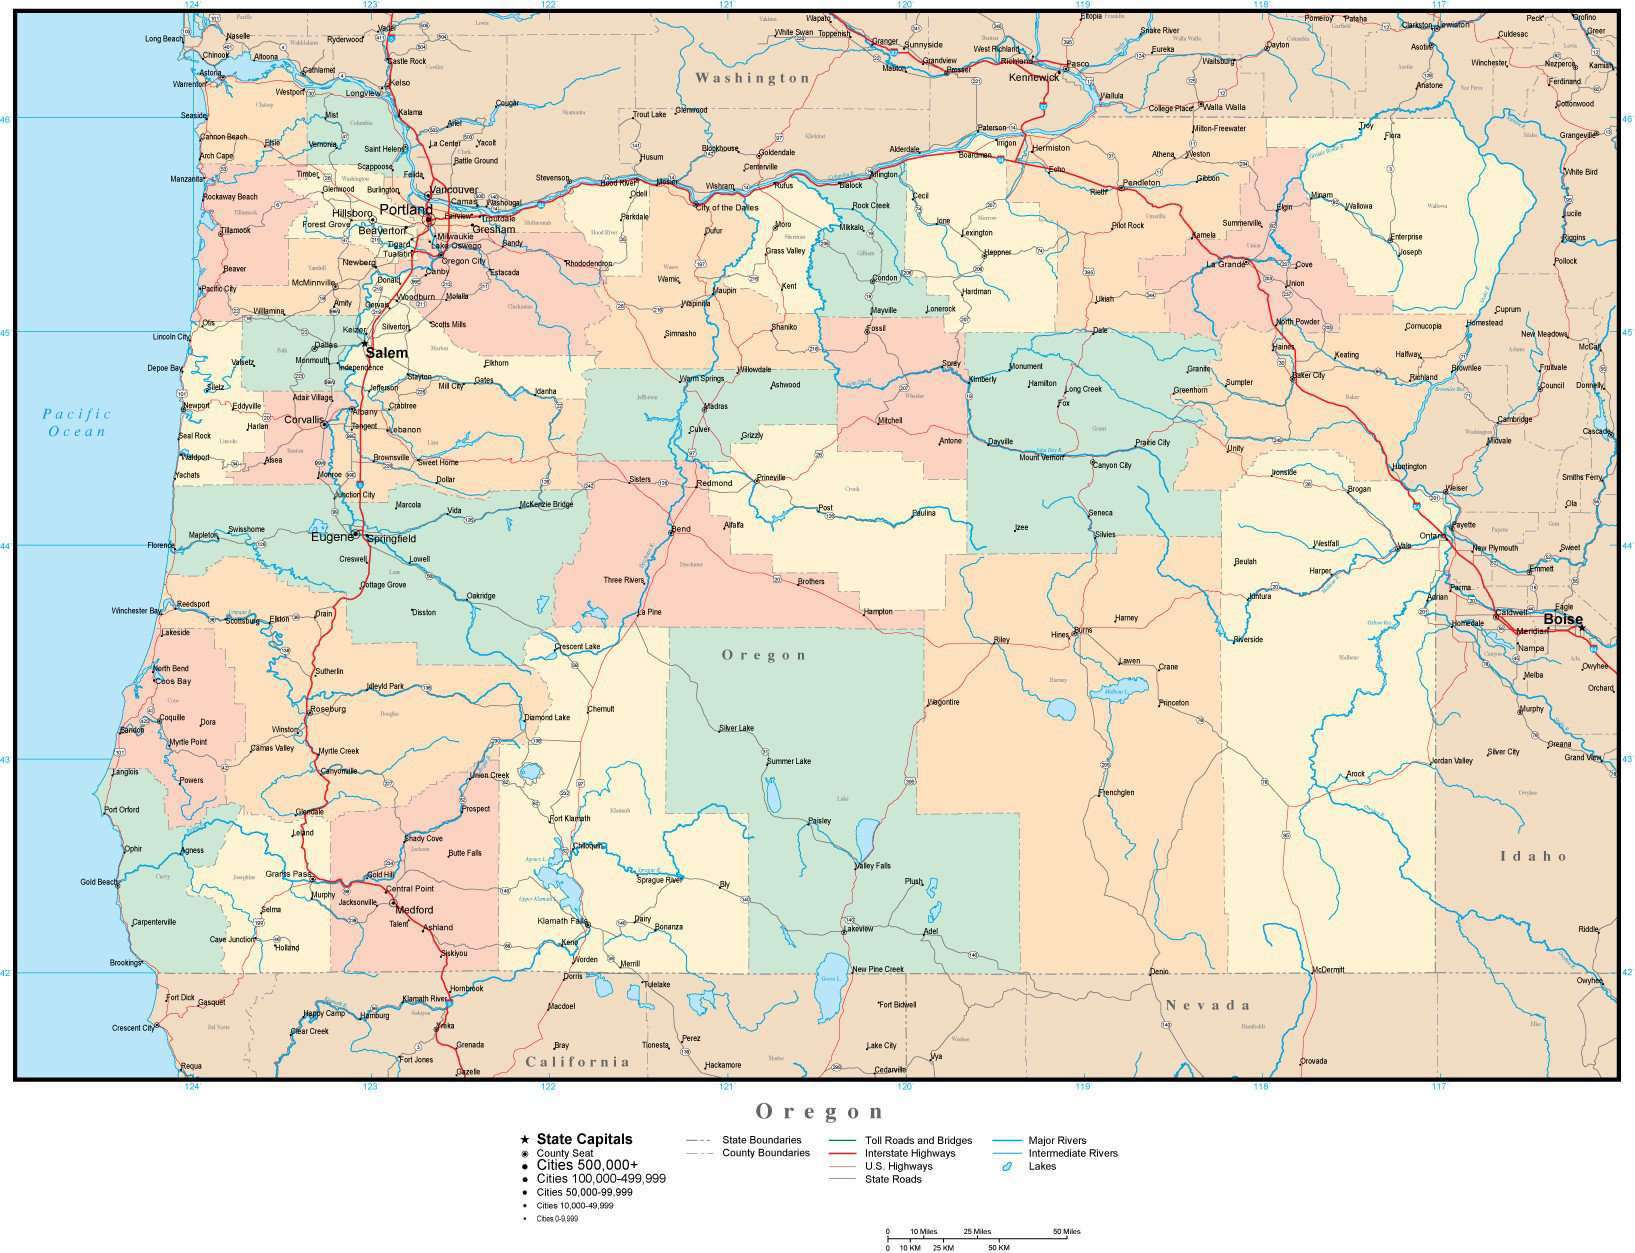 Oregon Adobe Illustrator Map with Counties, Cities, County Seats, Major